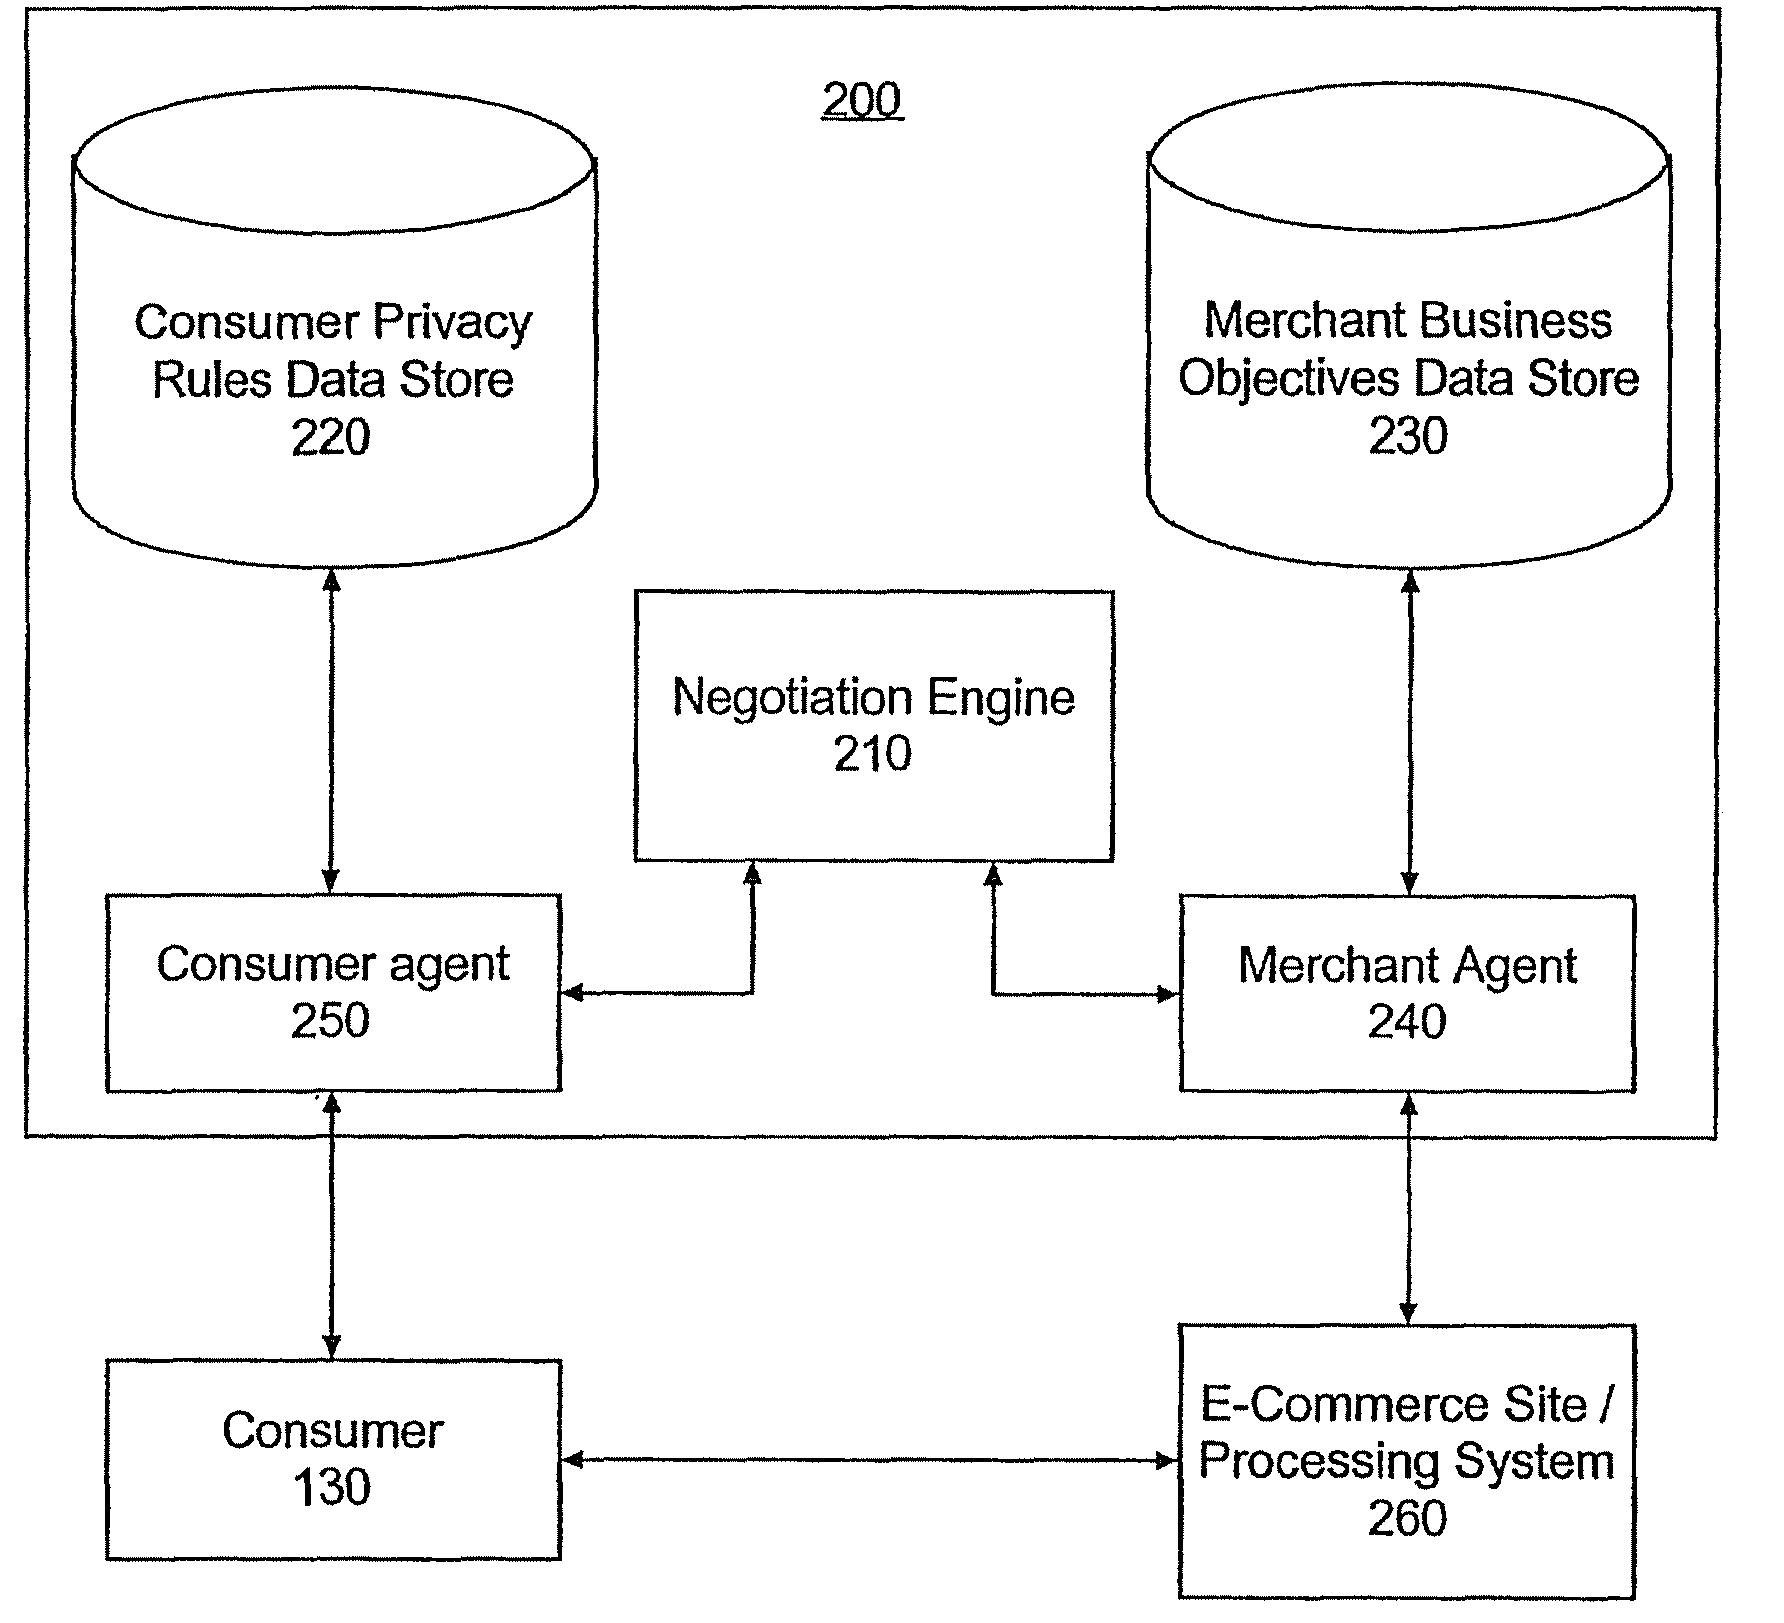 Method and apparatus for privacy negotiation